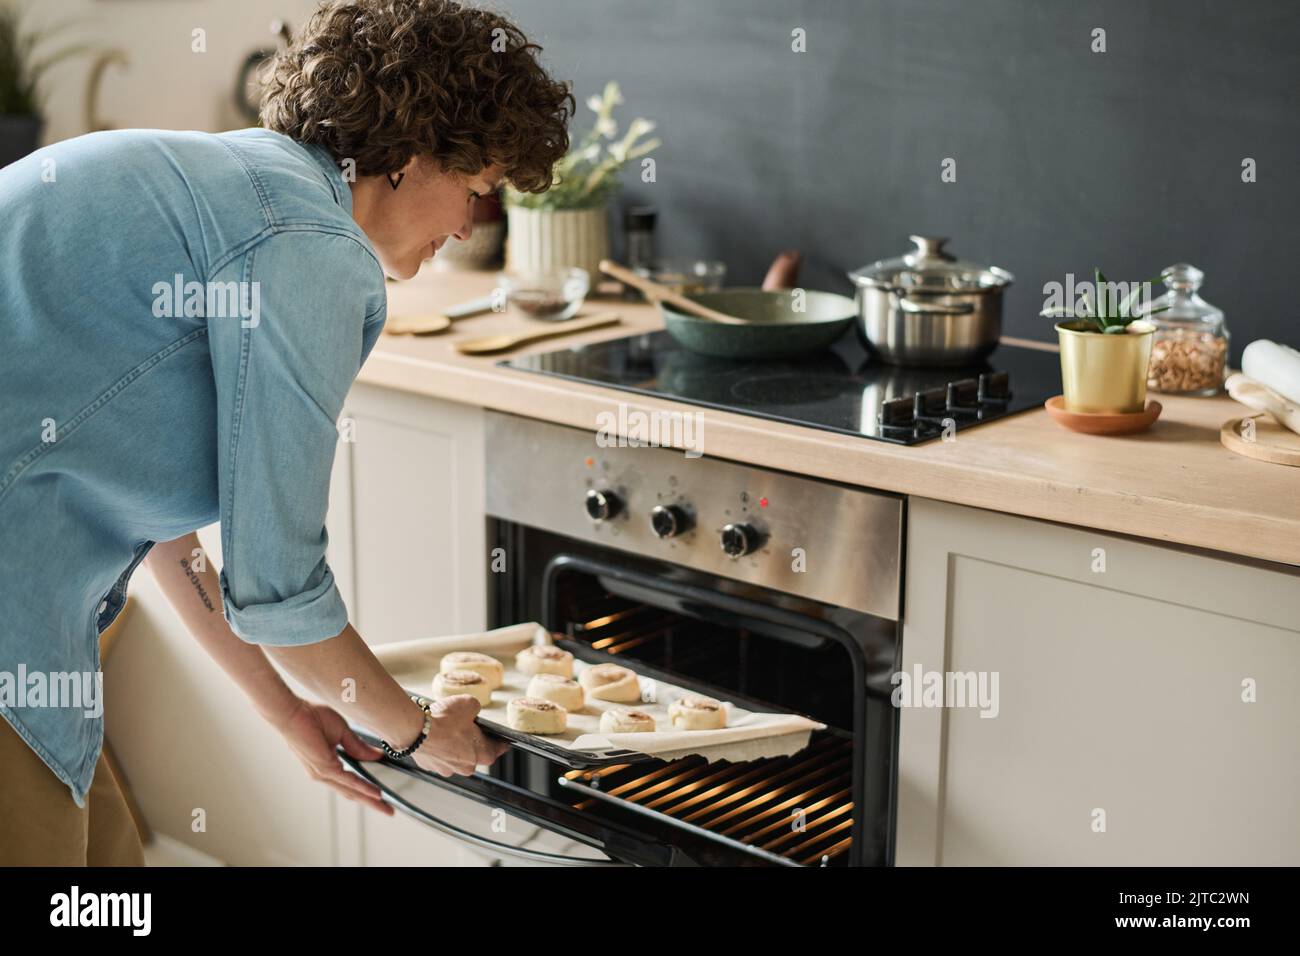 Young woman putting tray with sugar buns in the oven in domestic kitchen Stock Photo